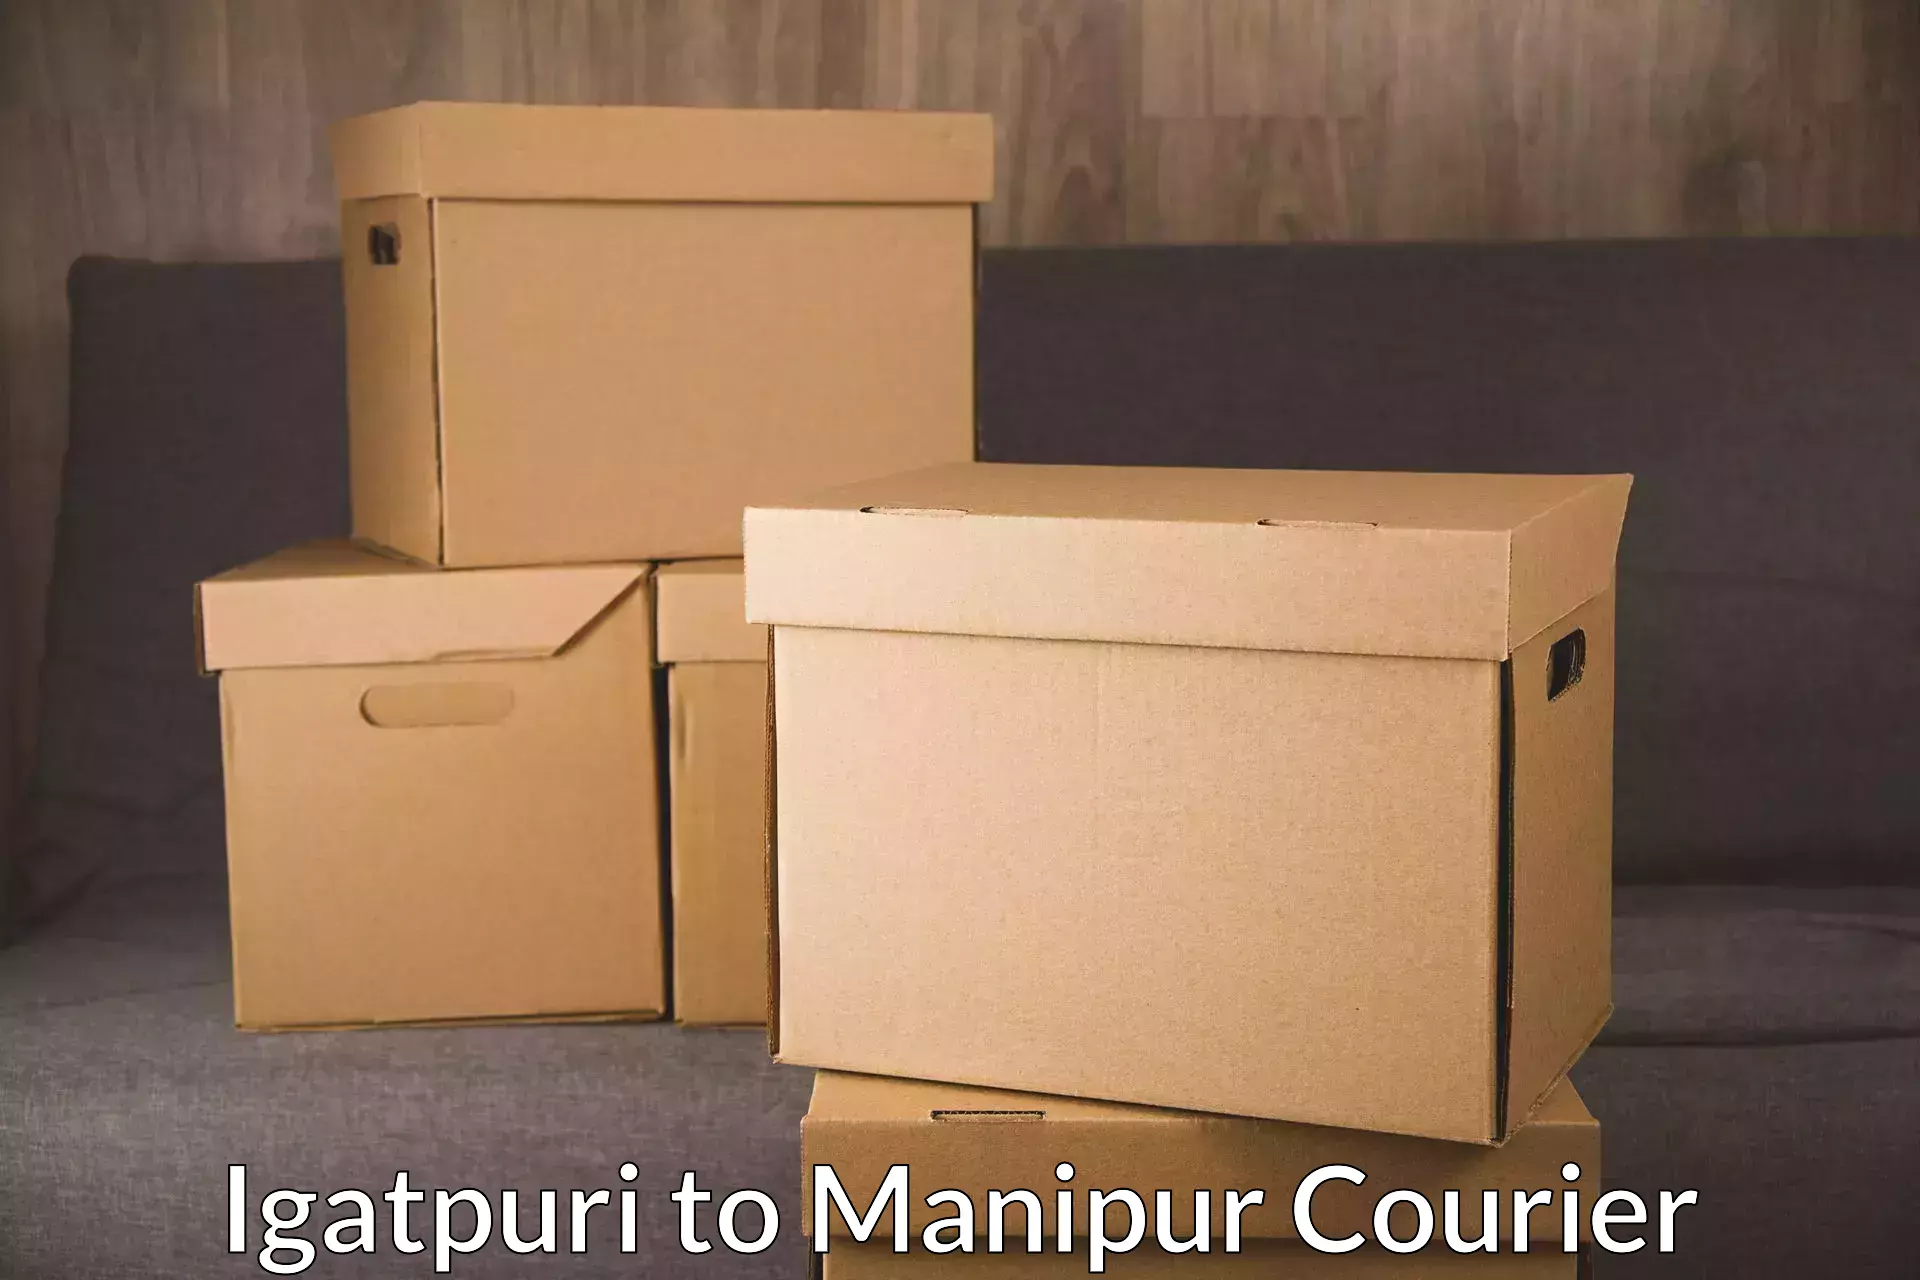 State-of-the-art courier technology Igatpuri to Senapati